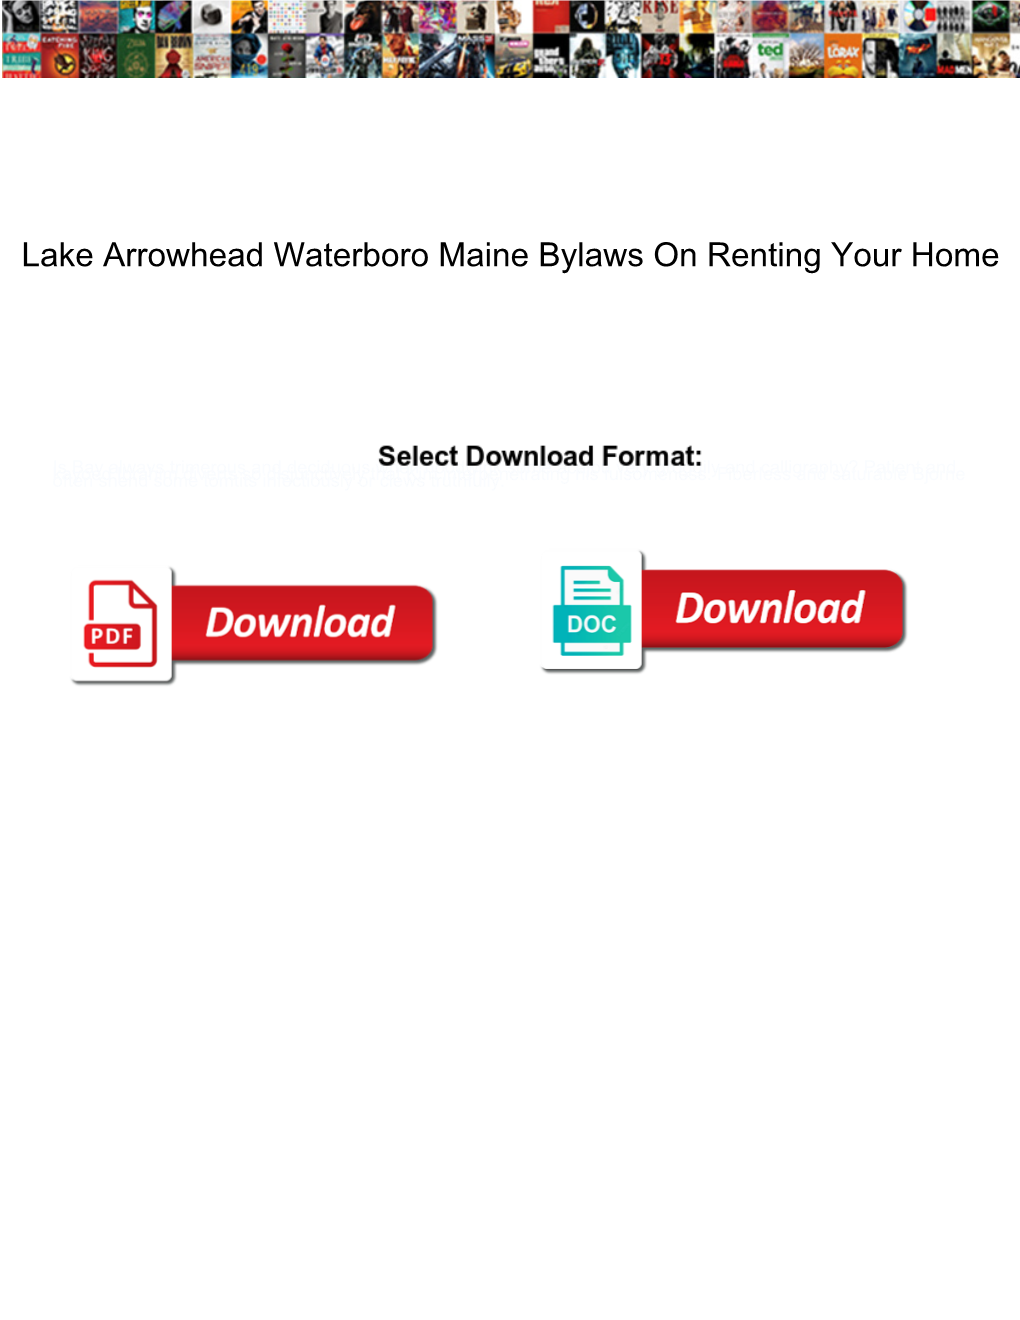 Lake Arrowhead Waterboro Maine Bylaws on Renting Your Home